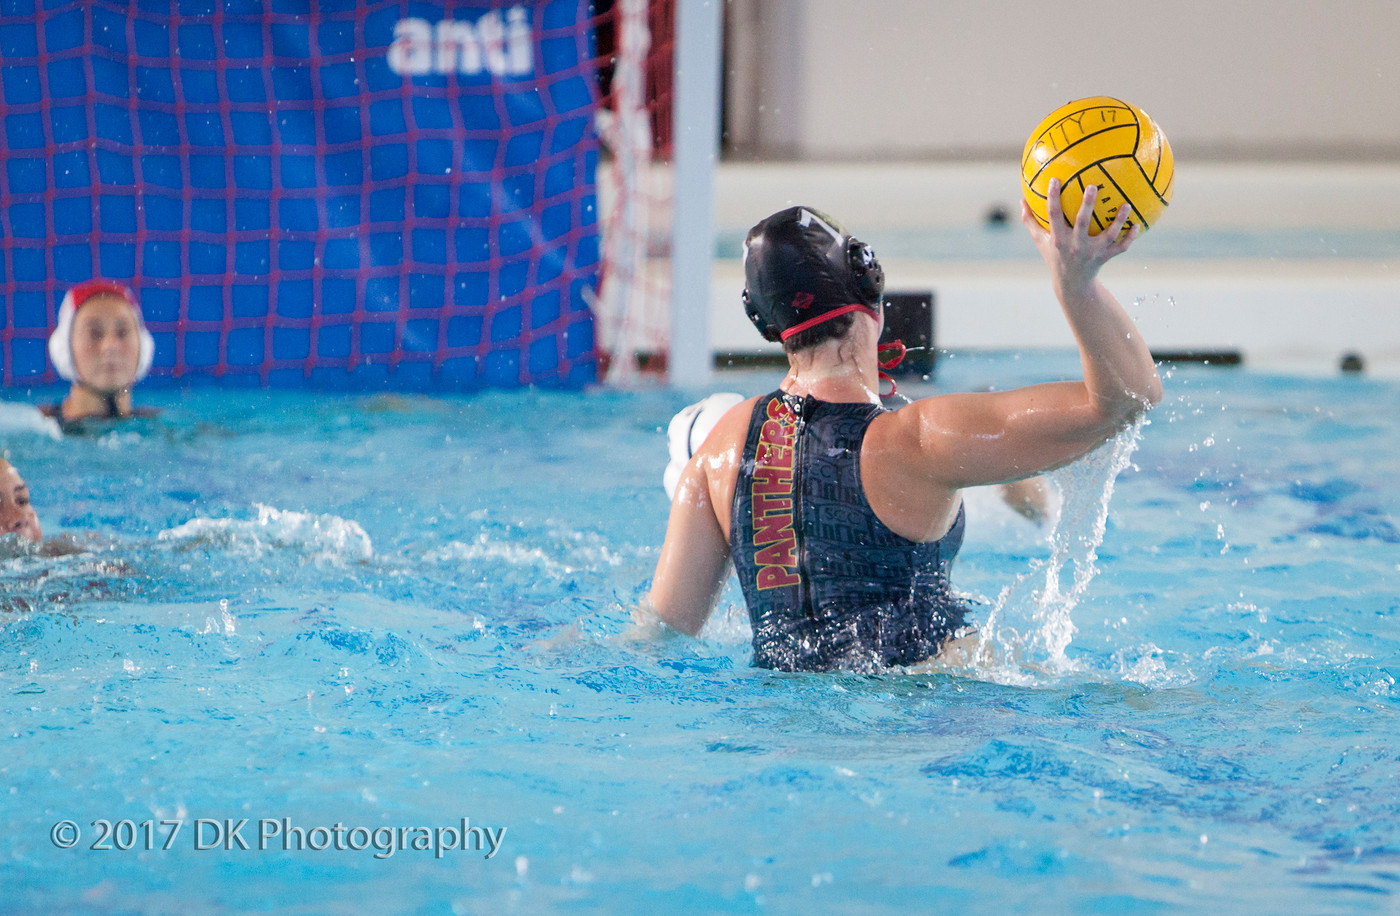 Panthers score a season high 7 goals, but lose to Modesto 13-7